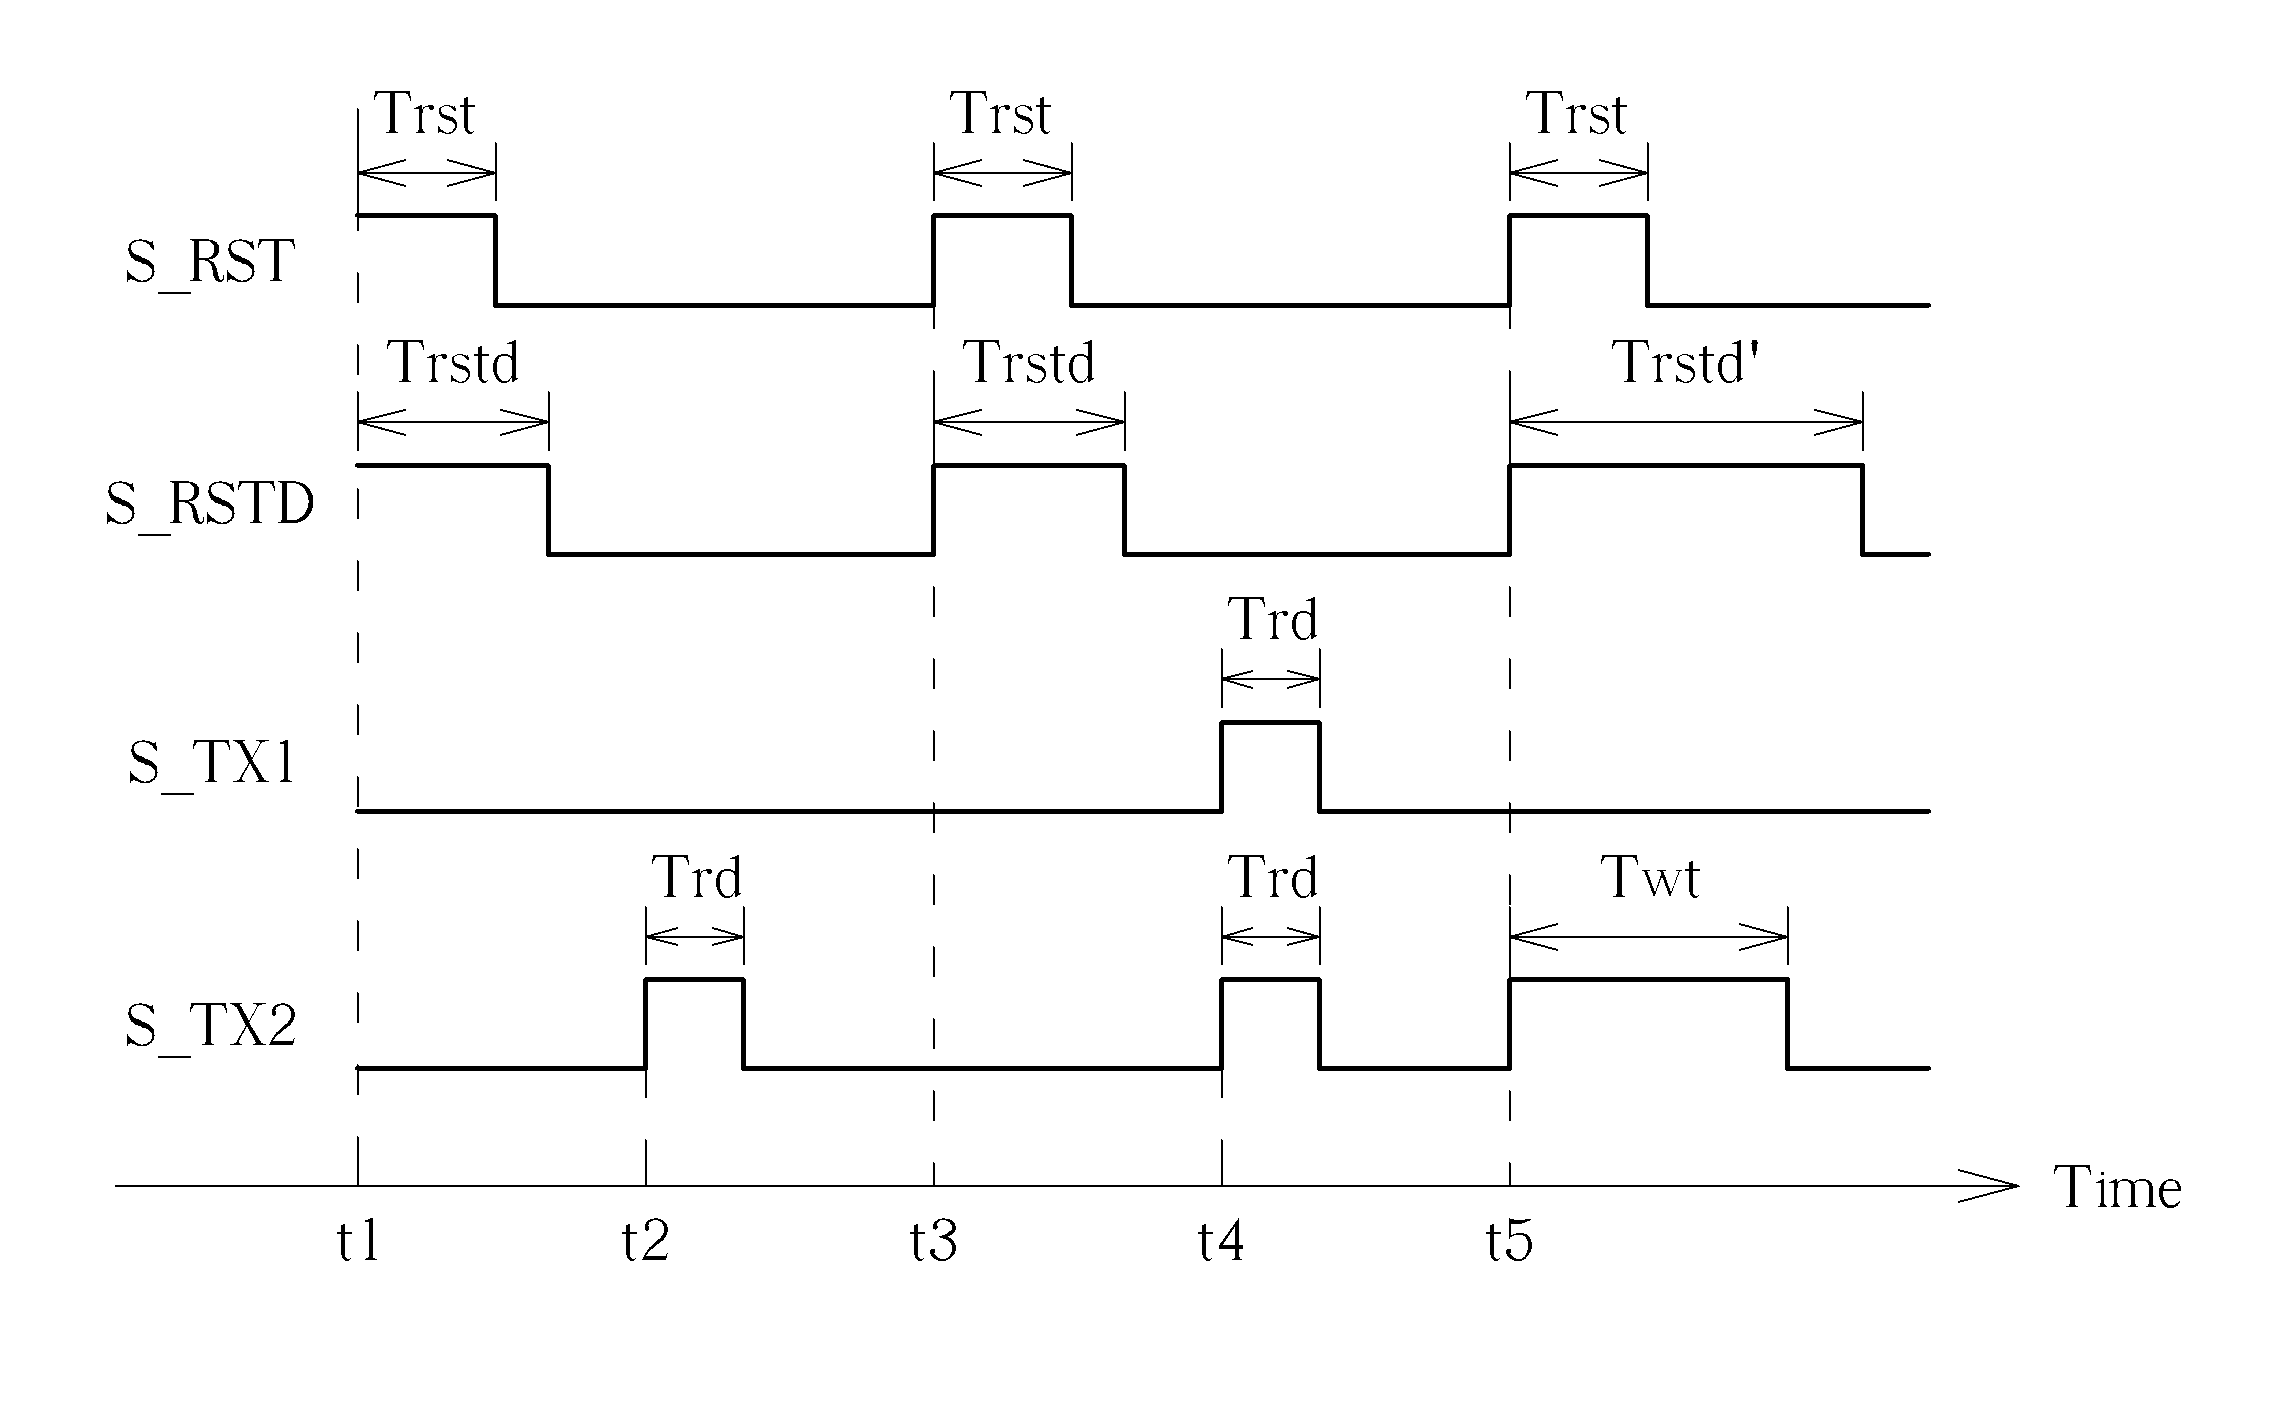 Imaging processing circuit for generating and storing updated pixel signal in storage capacitor before next operating cycle